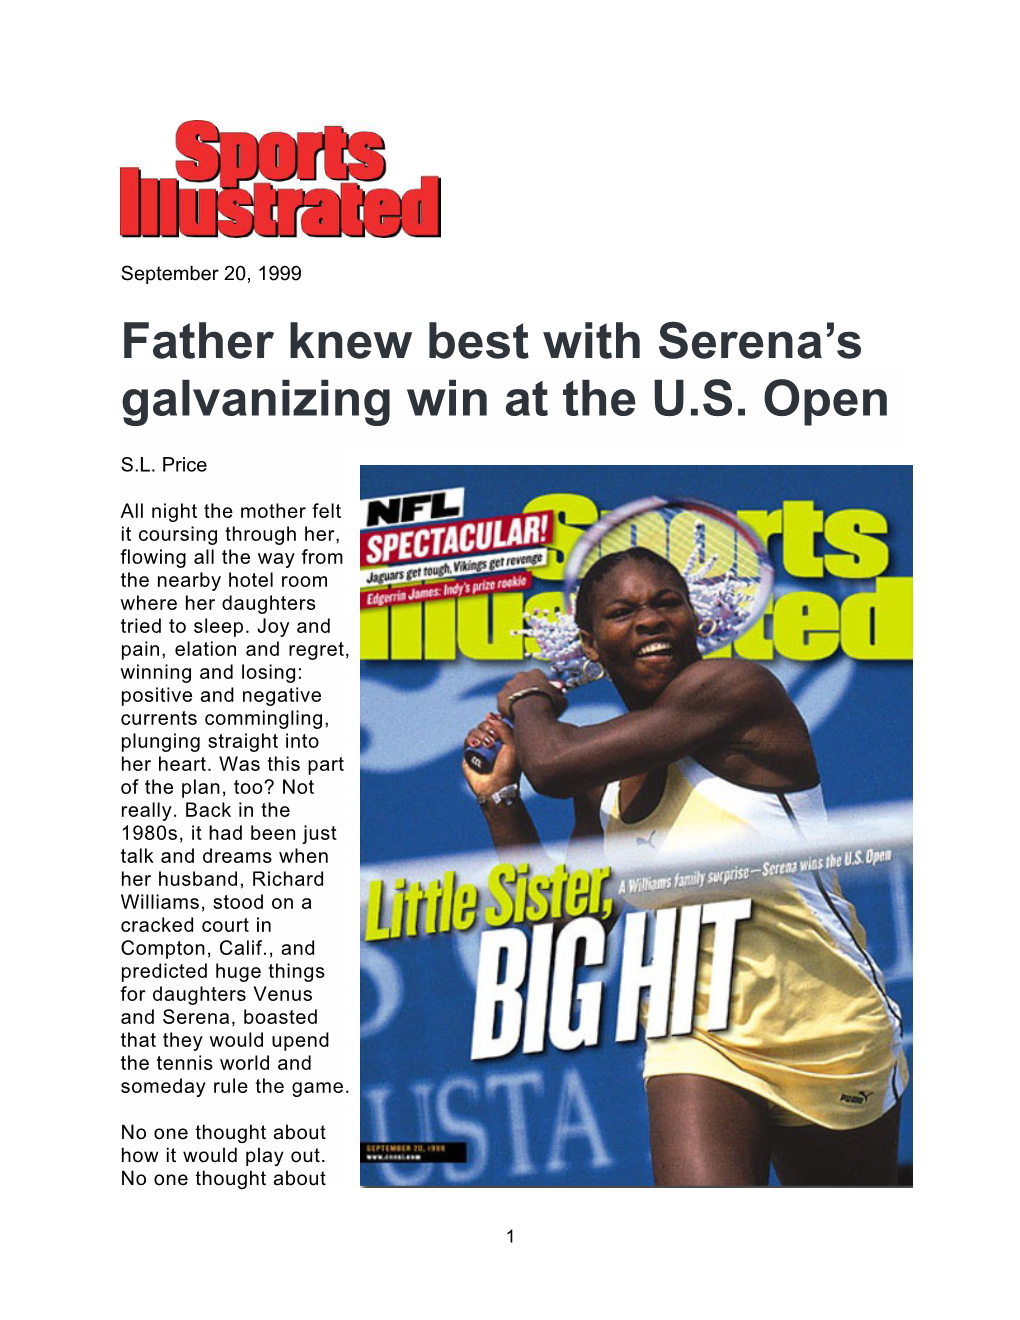 Father Knew Best with Serena's Galvanizing Win at the U.S. Open